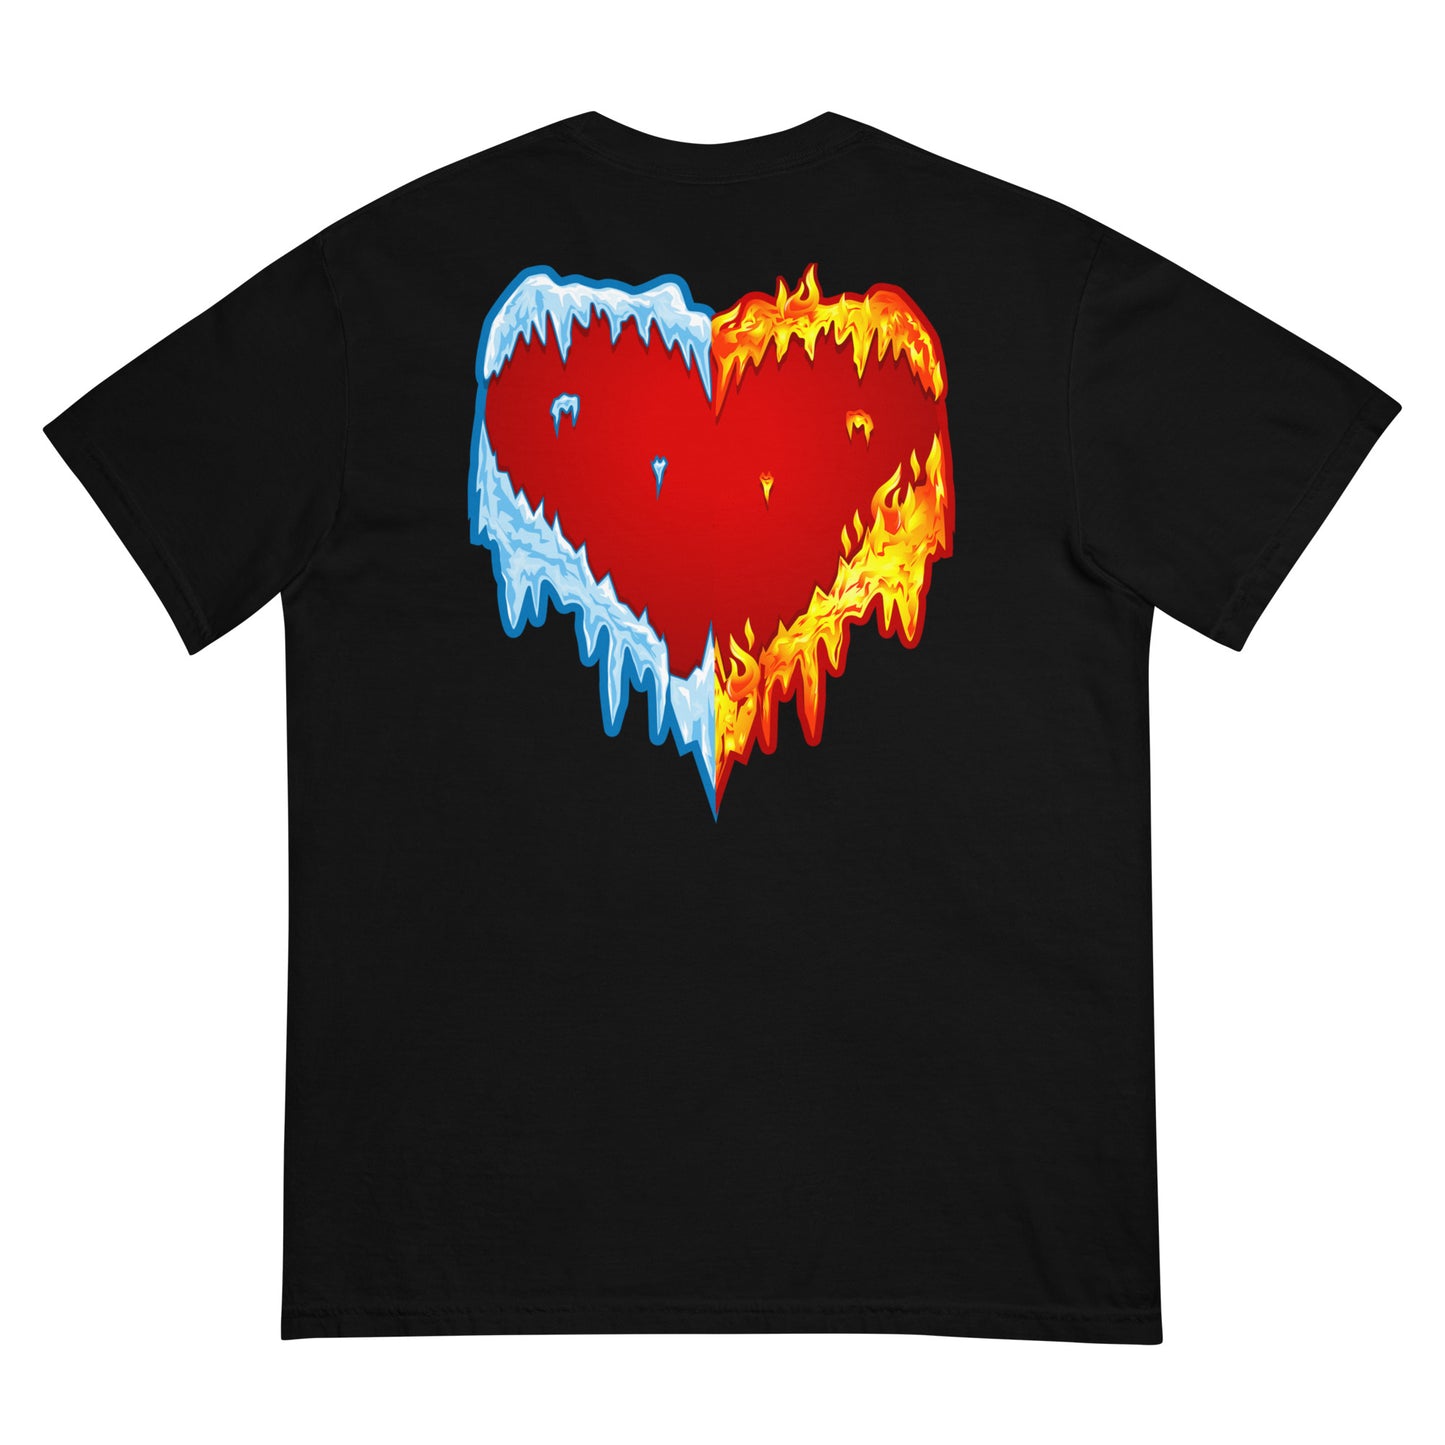 Limited Edition Fire and Ice Tee